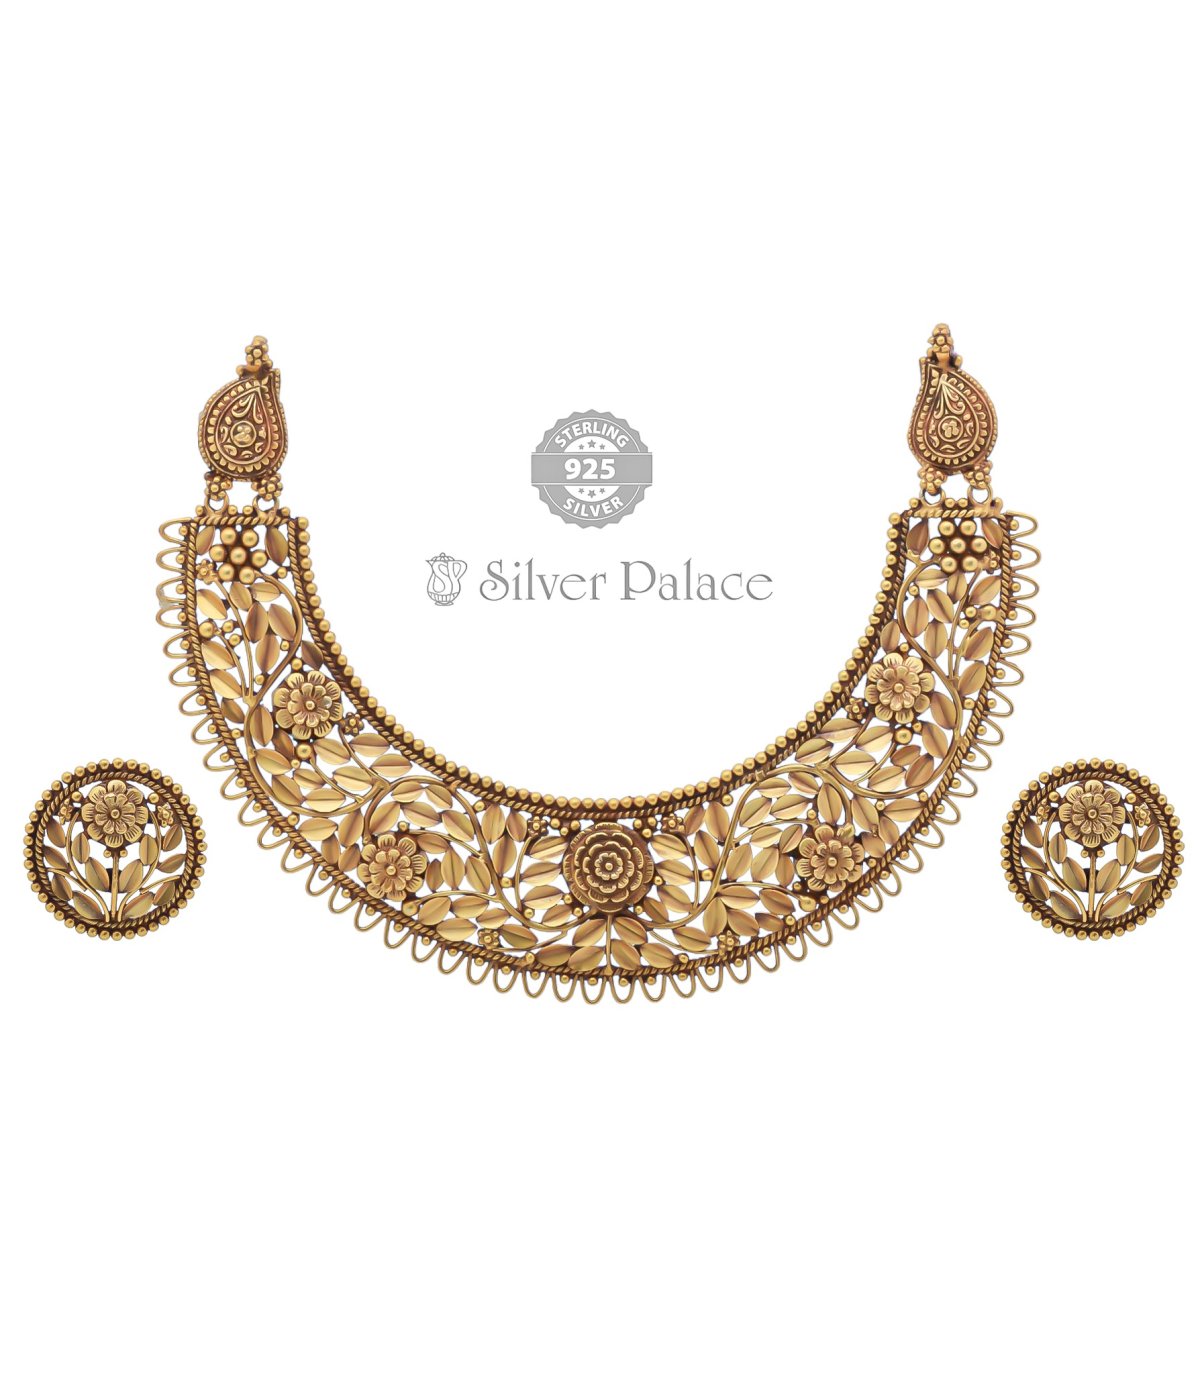 Gold Plated Design With Floral Patterns Necklace For Women 